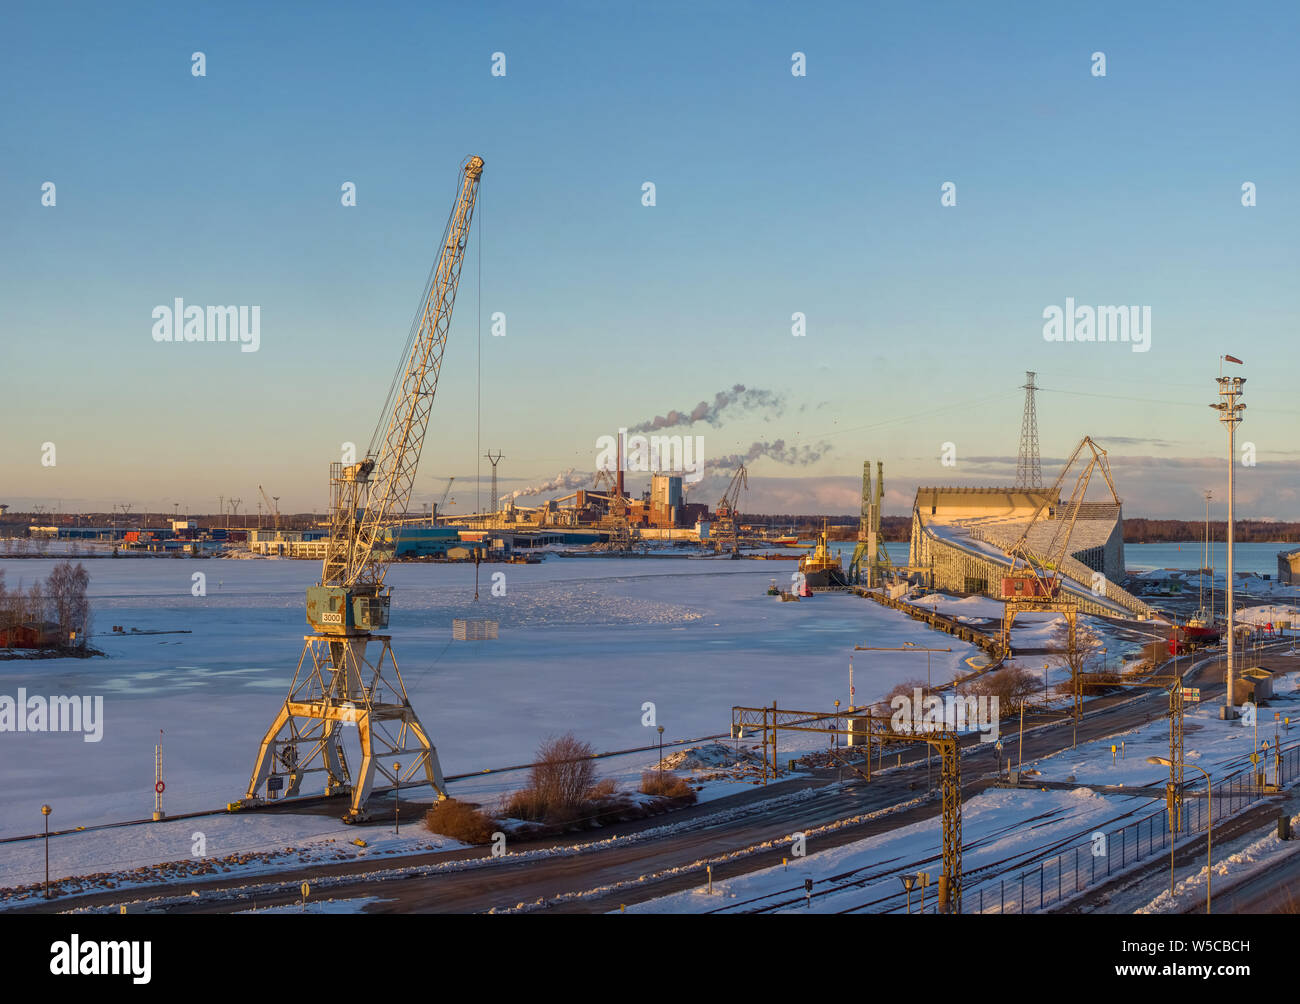 KOTKA, FINLAND - MARCH 10, 2019: March evening at the Vellamo maritime center Stock Photo